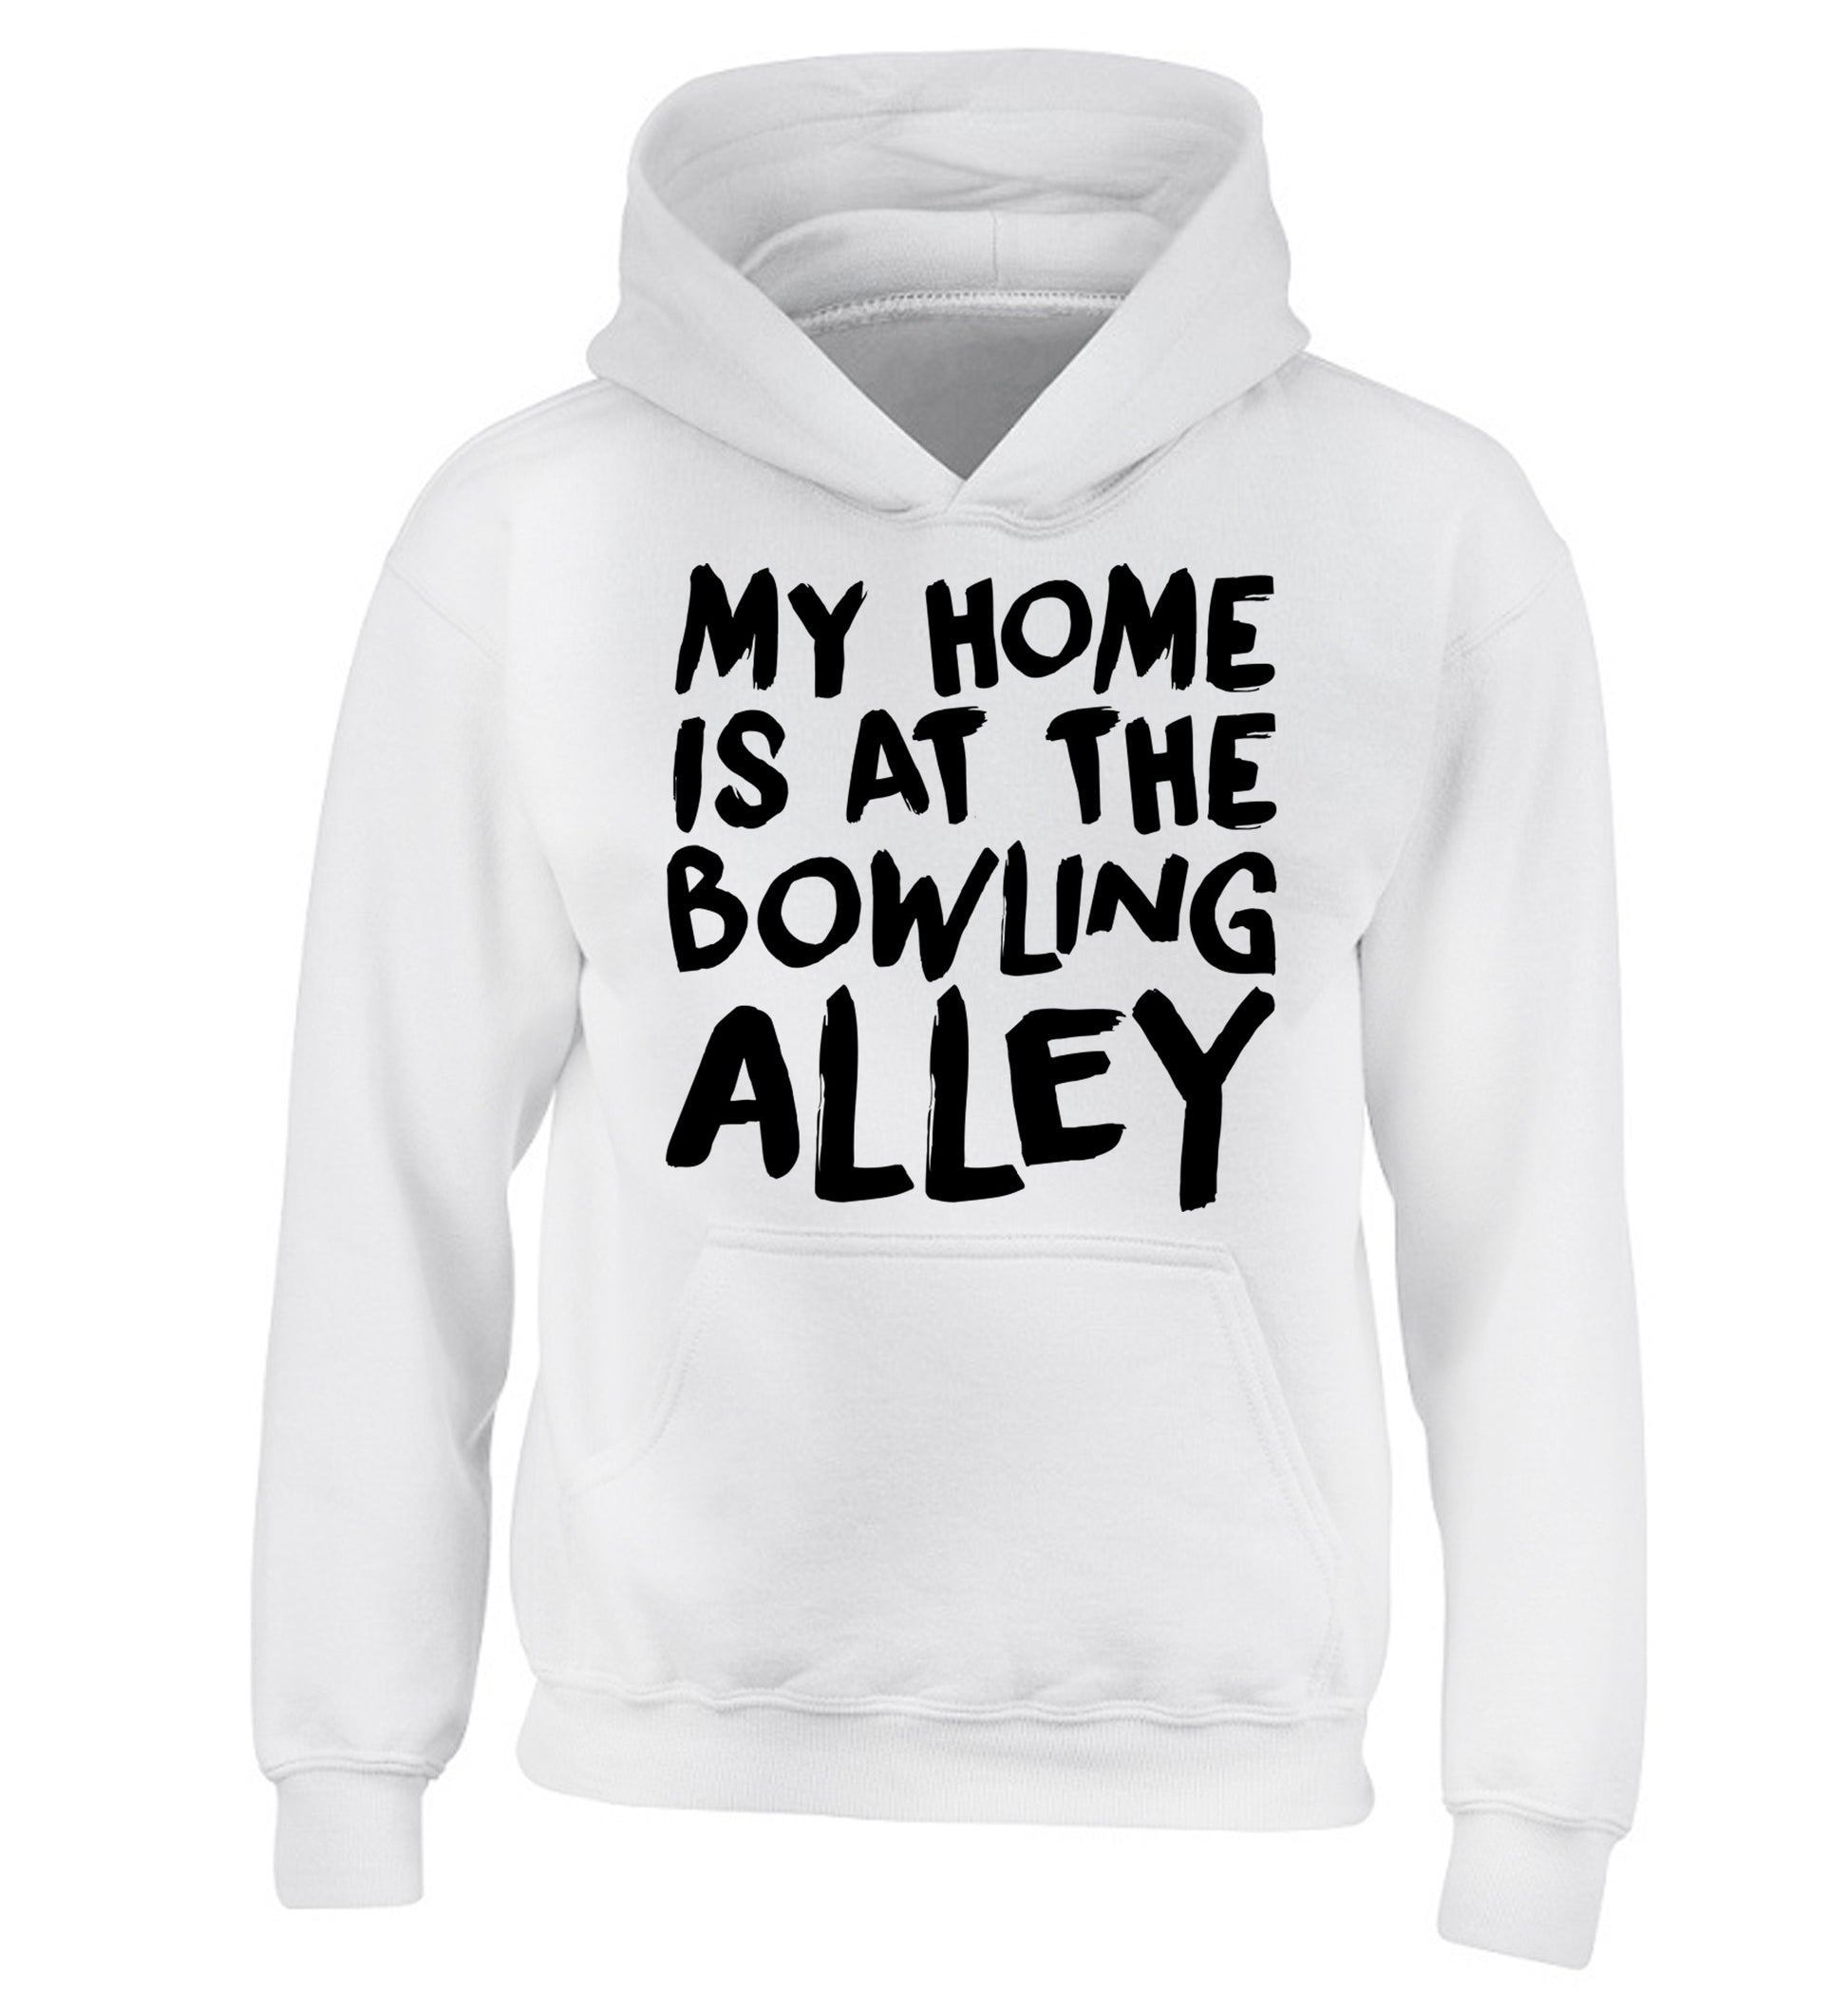 My home is at the bowling alley children's white hoodie 12-14 Years